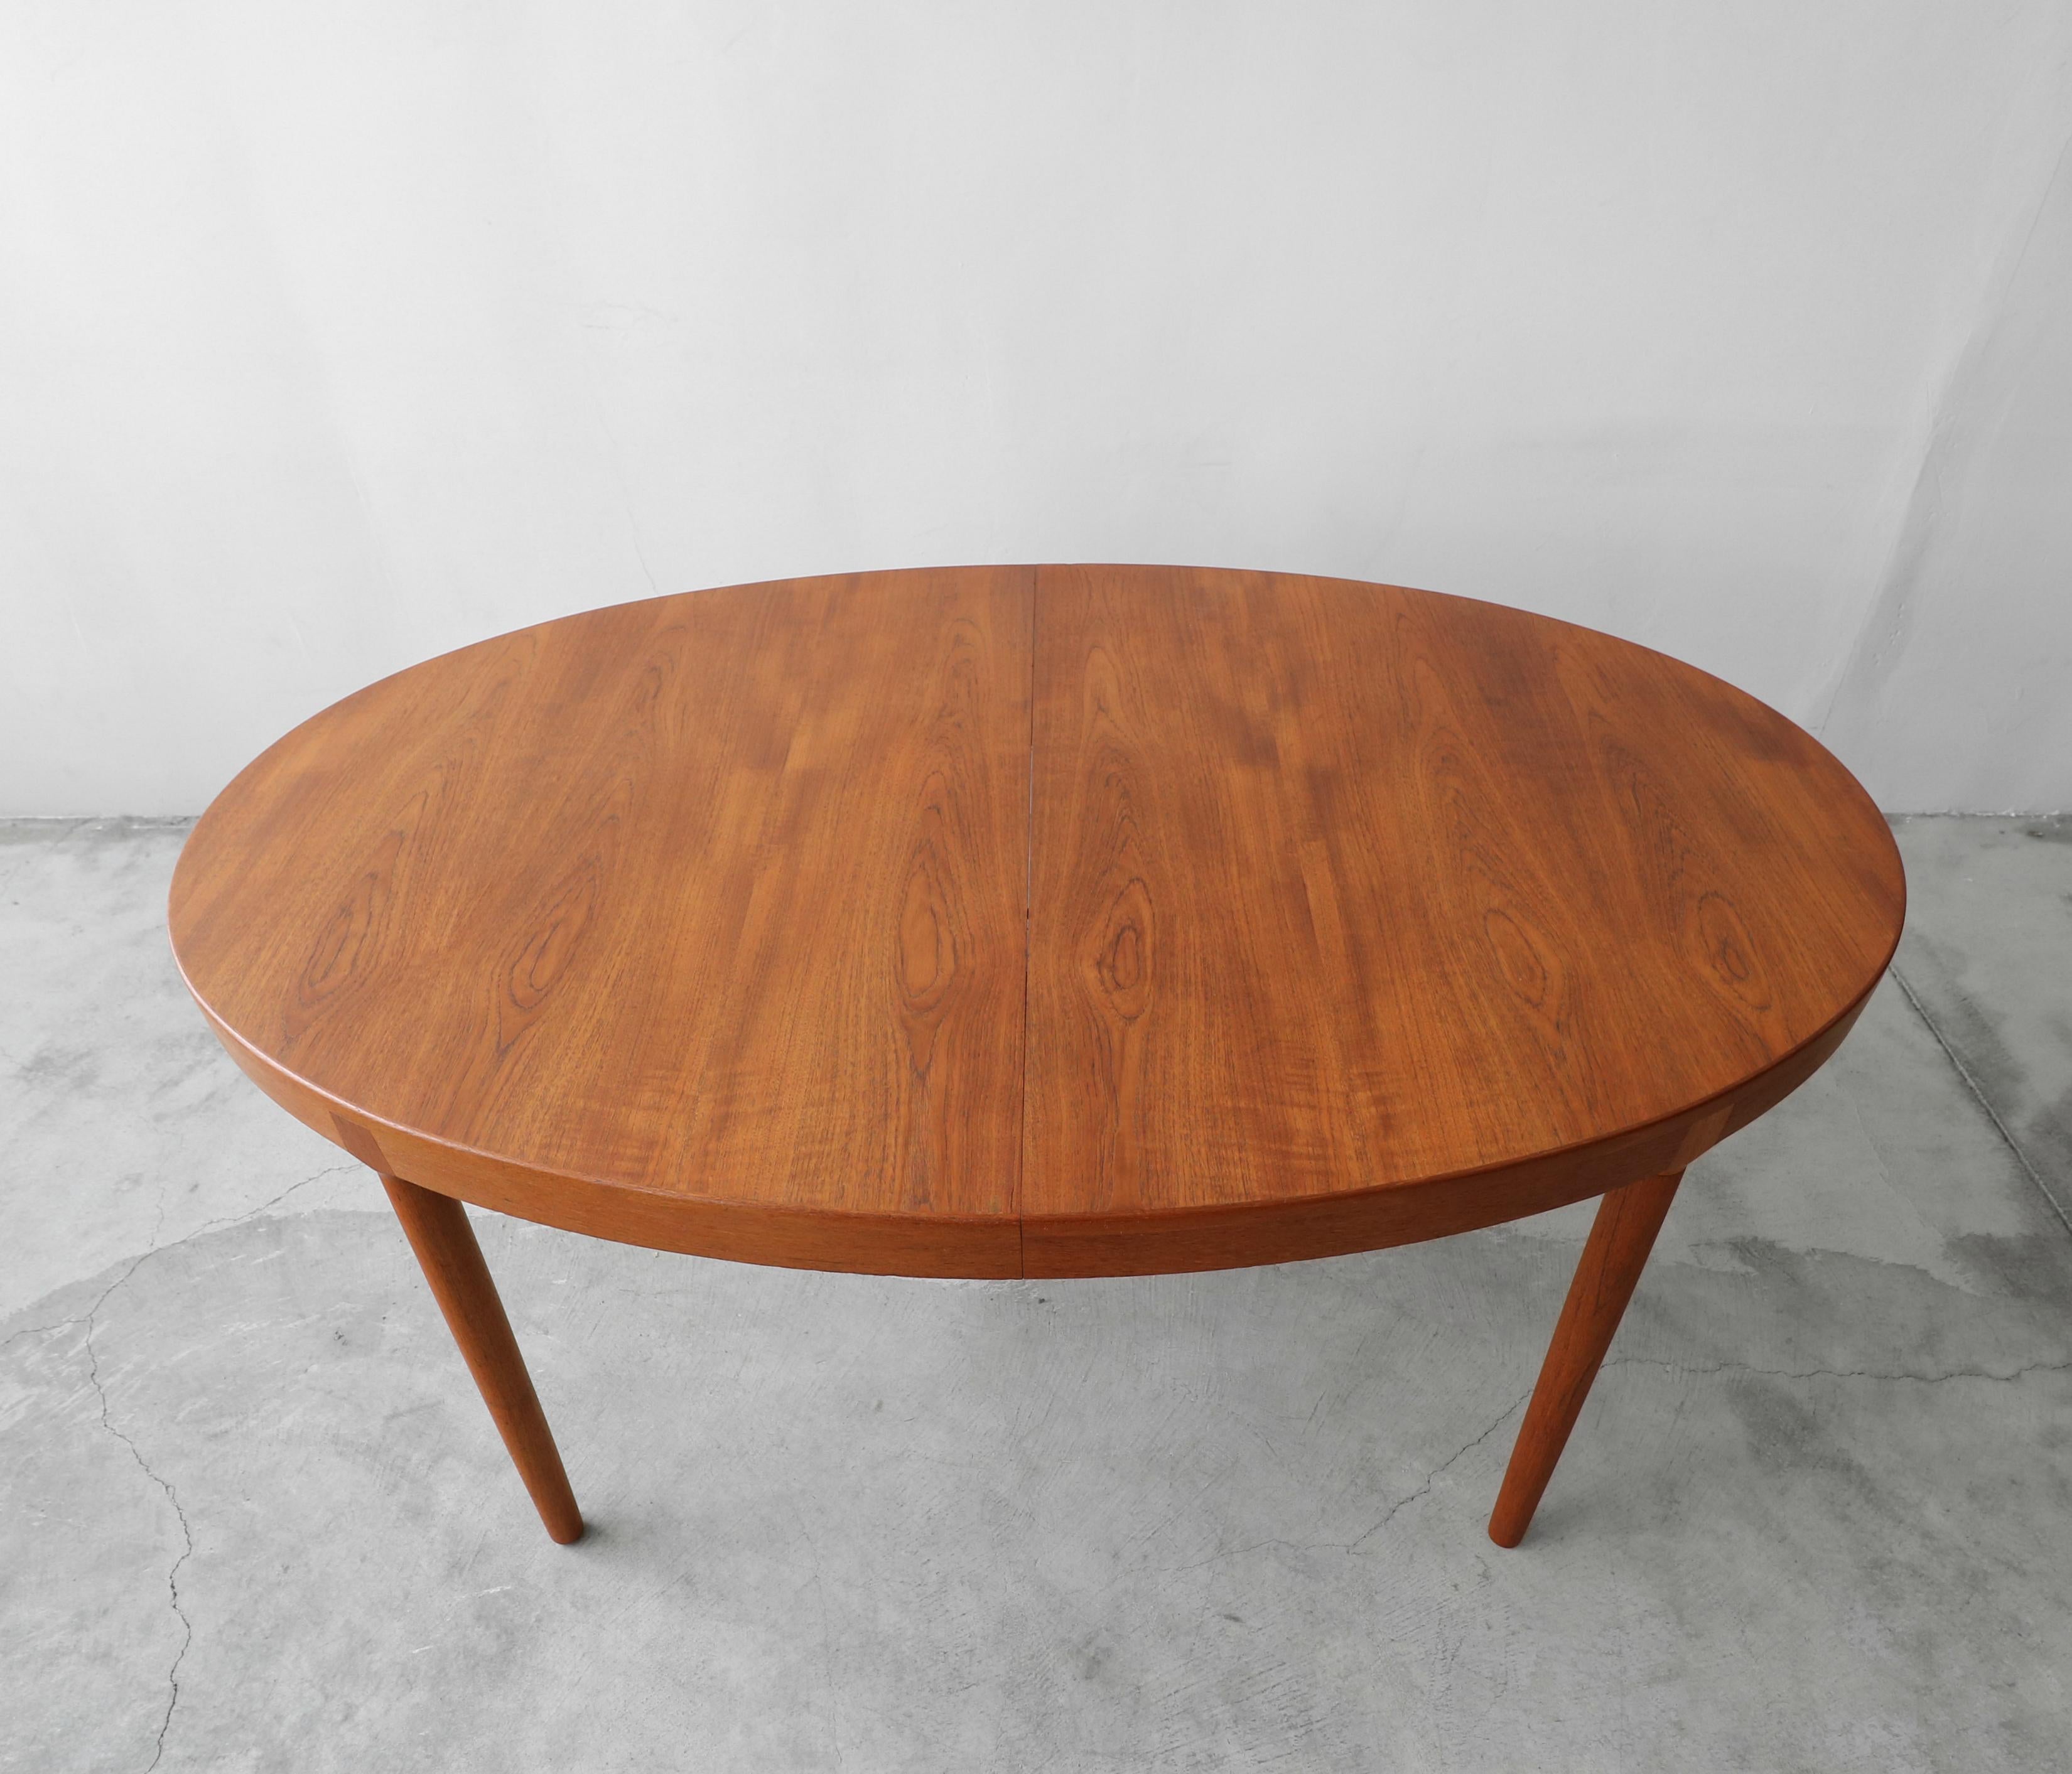 Midcentury Danish Teak Oval Dining Table by Harry Ostergaard for A/S Randers 1